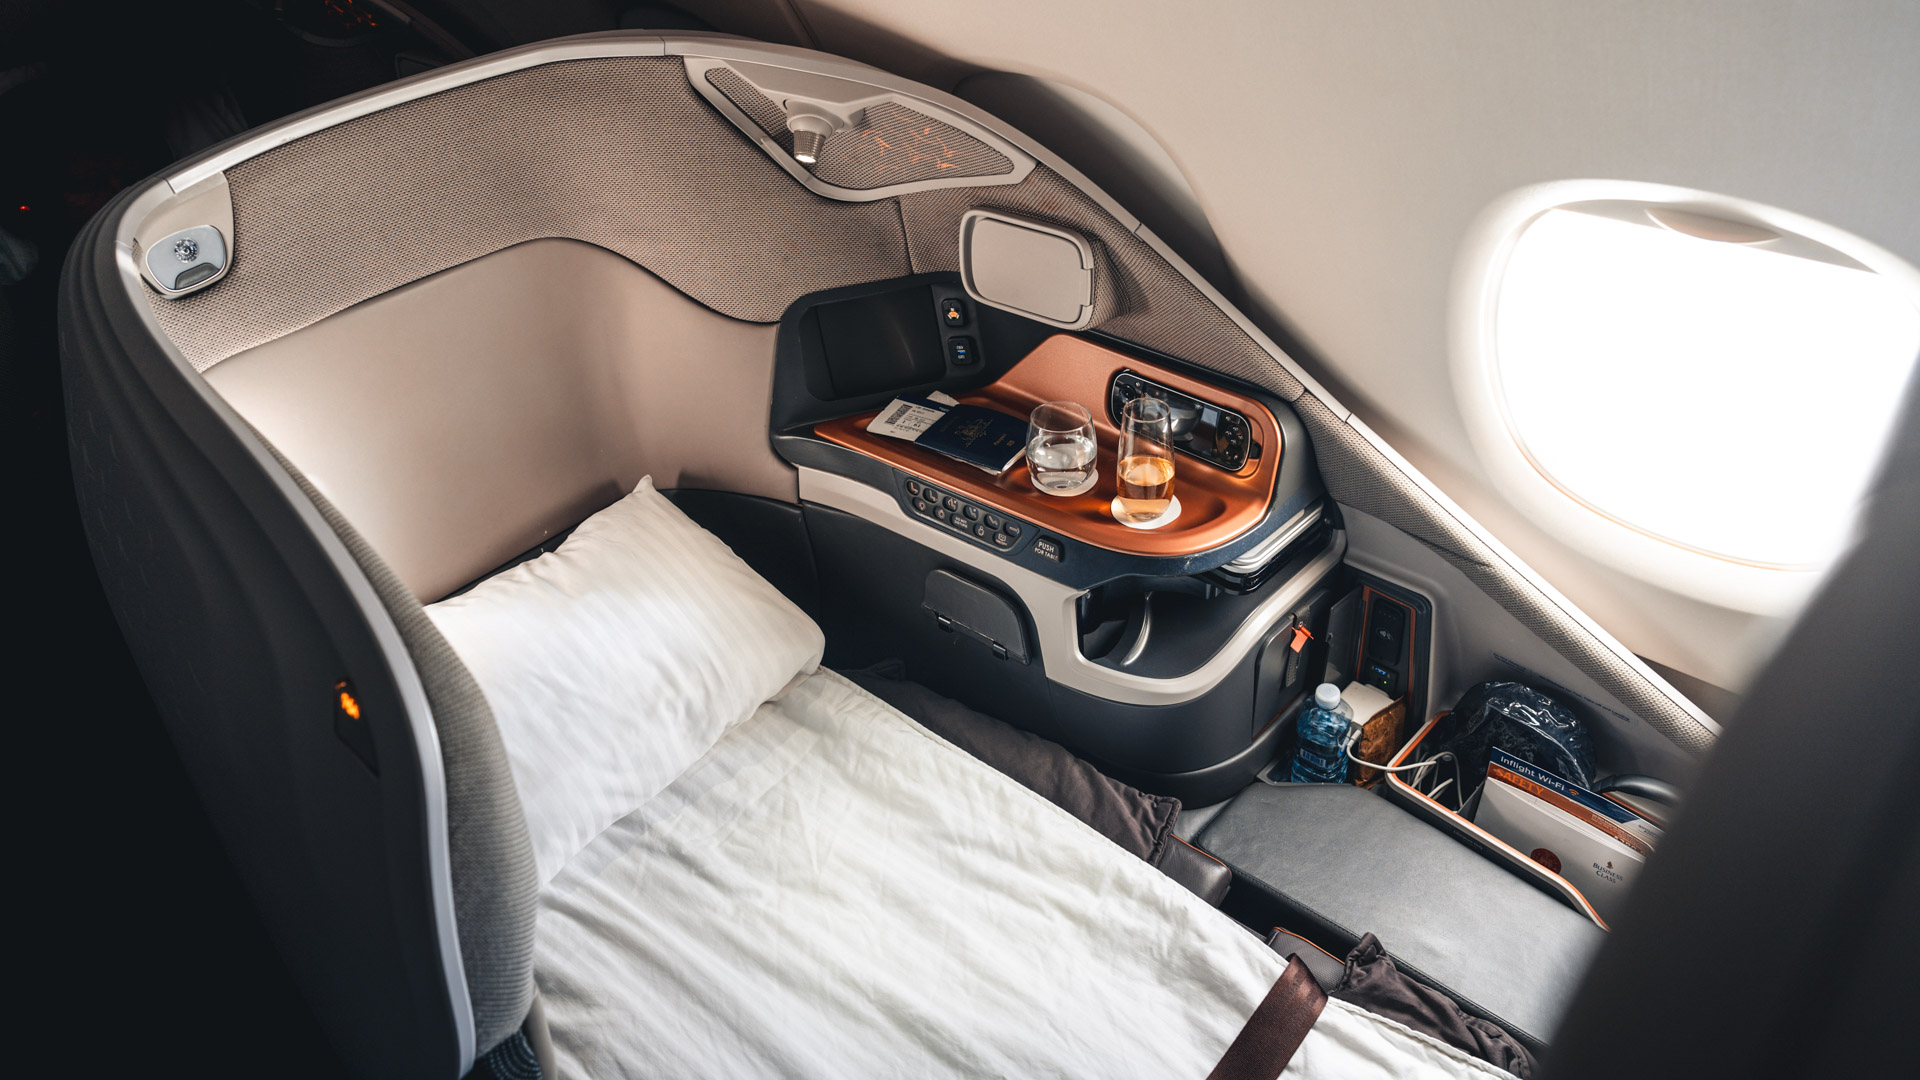 Sleep in Singapore Airlines Airbus A380 Business Class